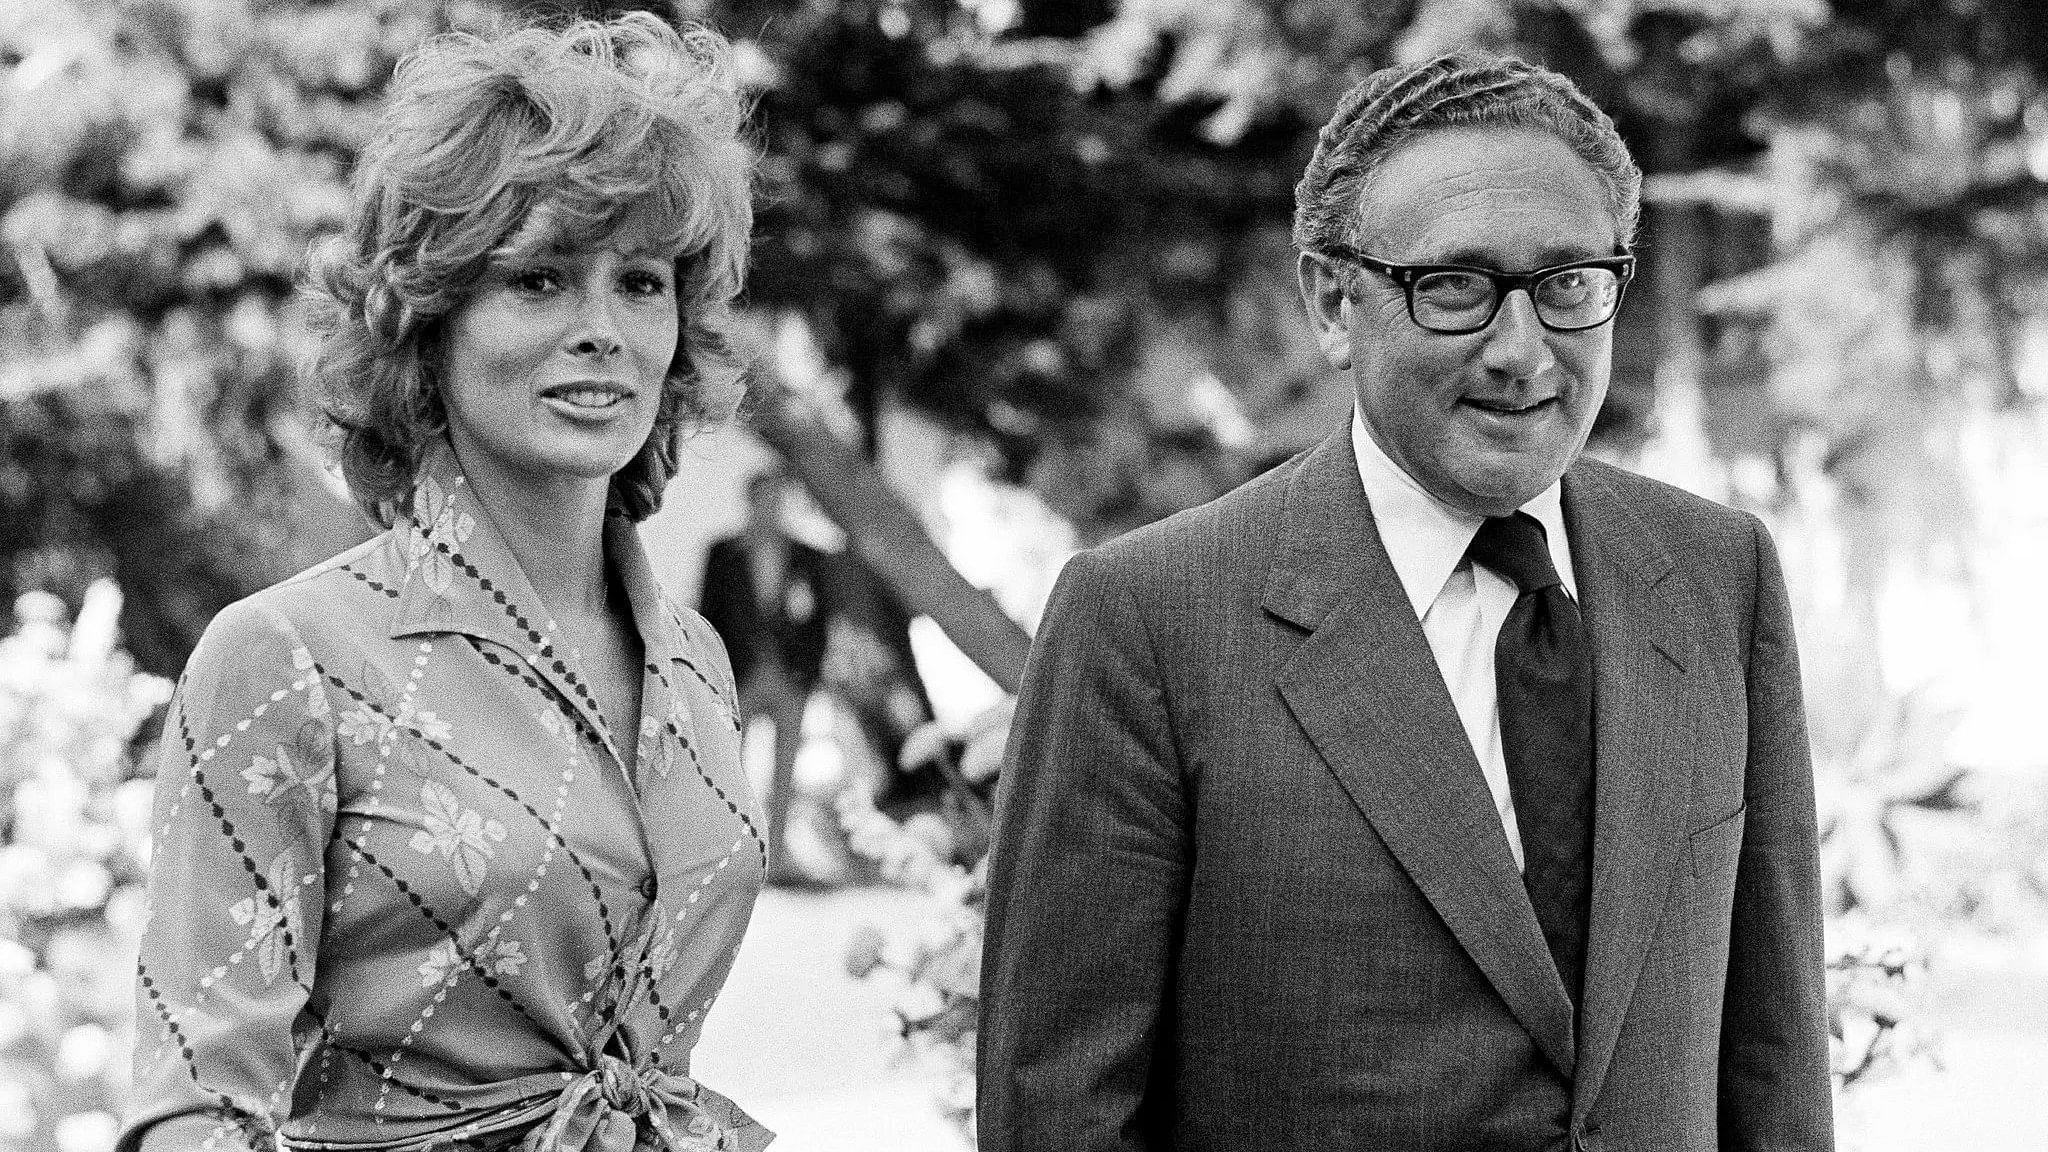 <div class="paragraphs"><p>Jill St John (left) is the first American Bond girl in the James Bond movie franchise, and appeared in 'Diamonds are Forever'. She is pictured with Henry Kissinger (right). The two, despite being romantically linked, denied any such relationship.</p></div>